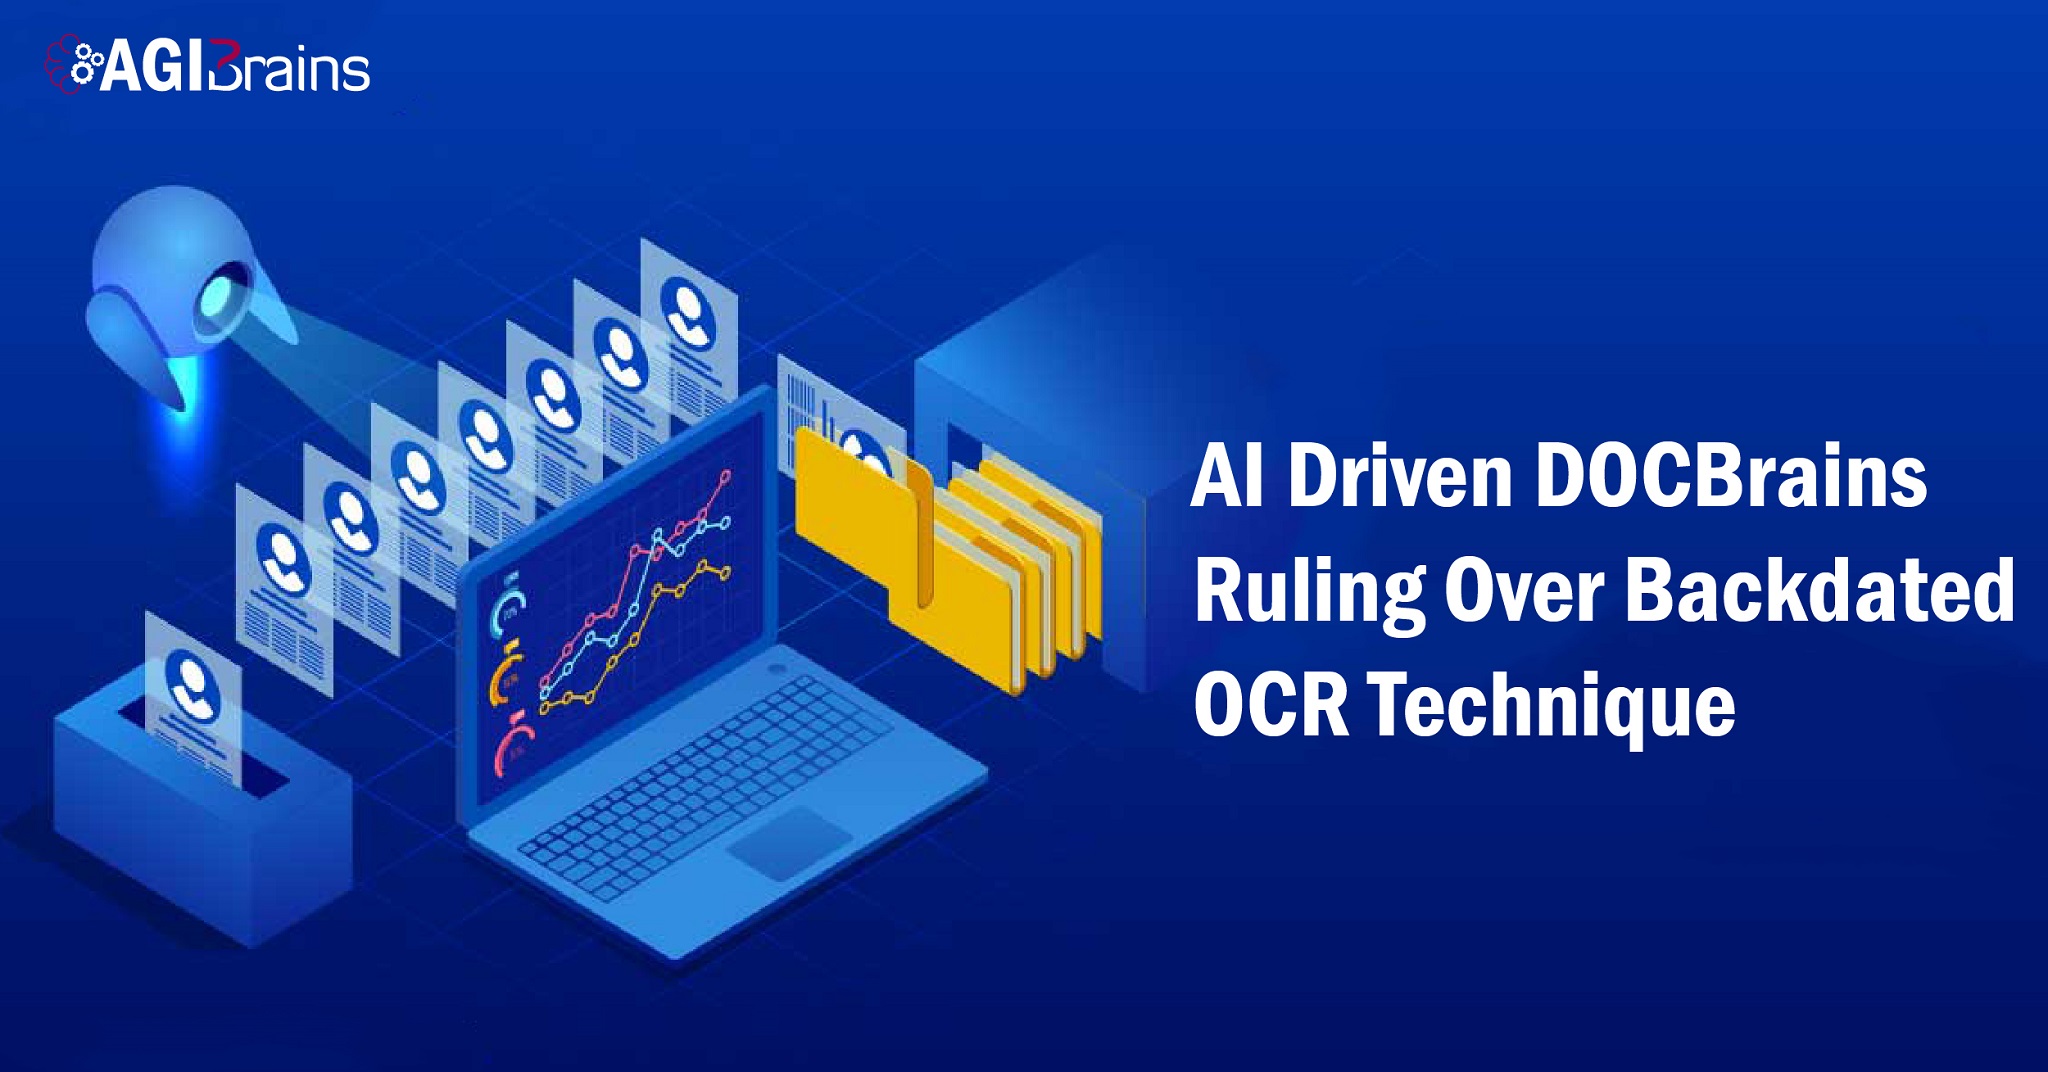 AI Driven DOCBrains Ruling Over Backdated OCR Technique